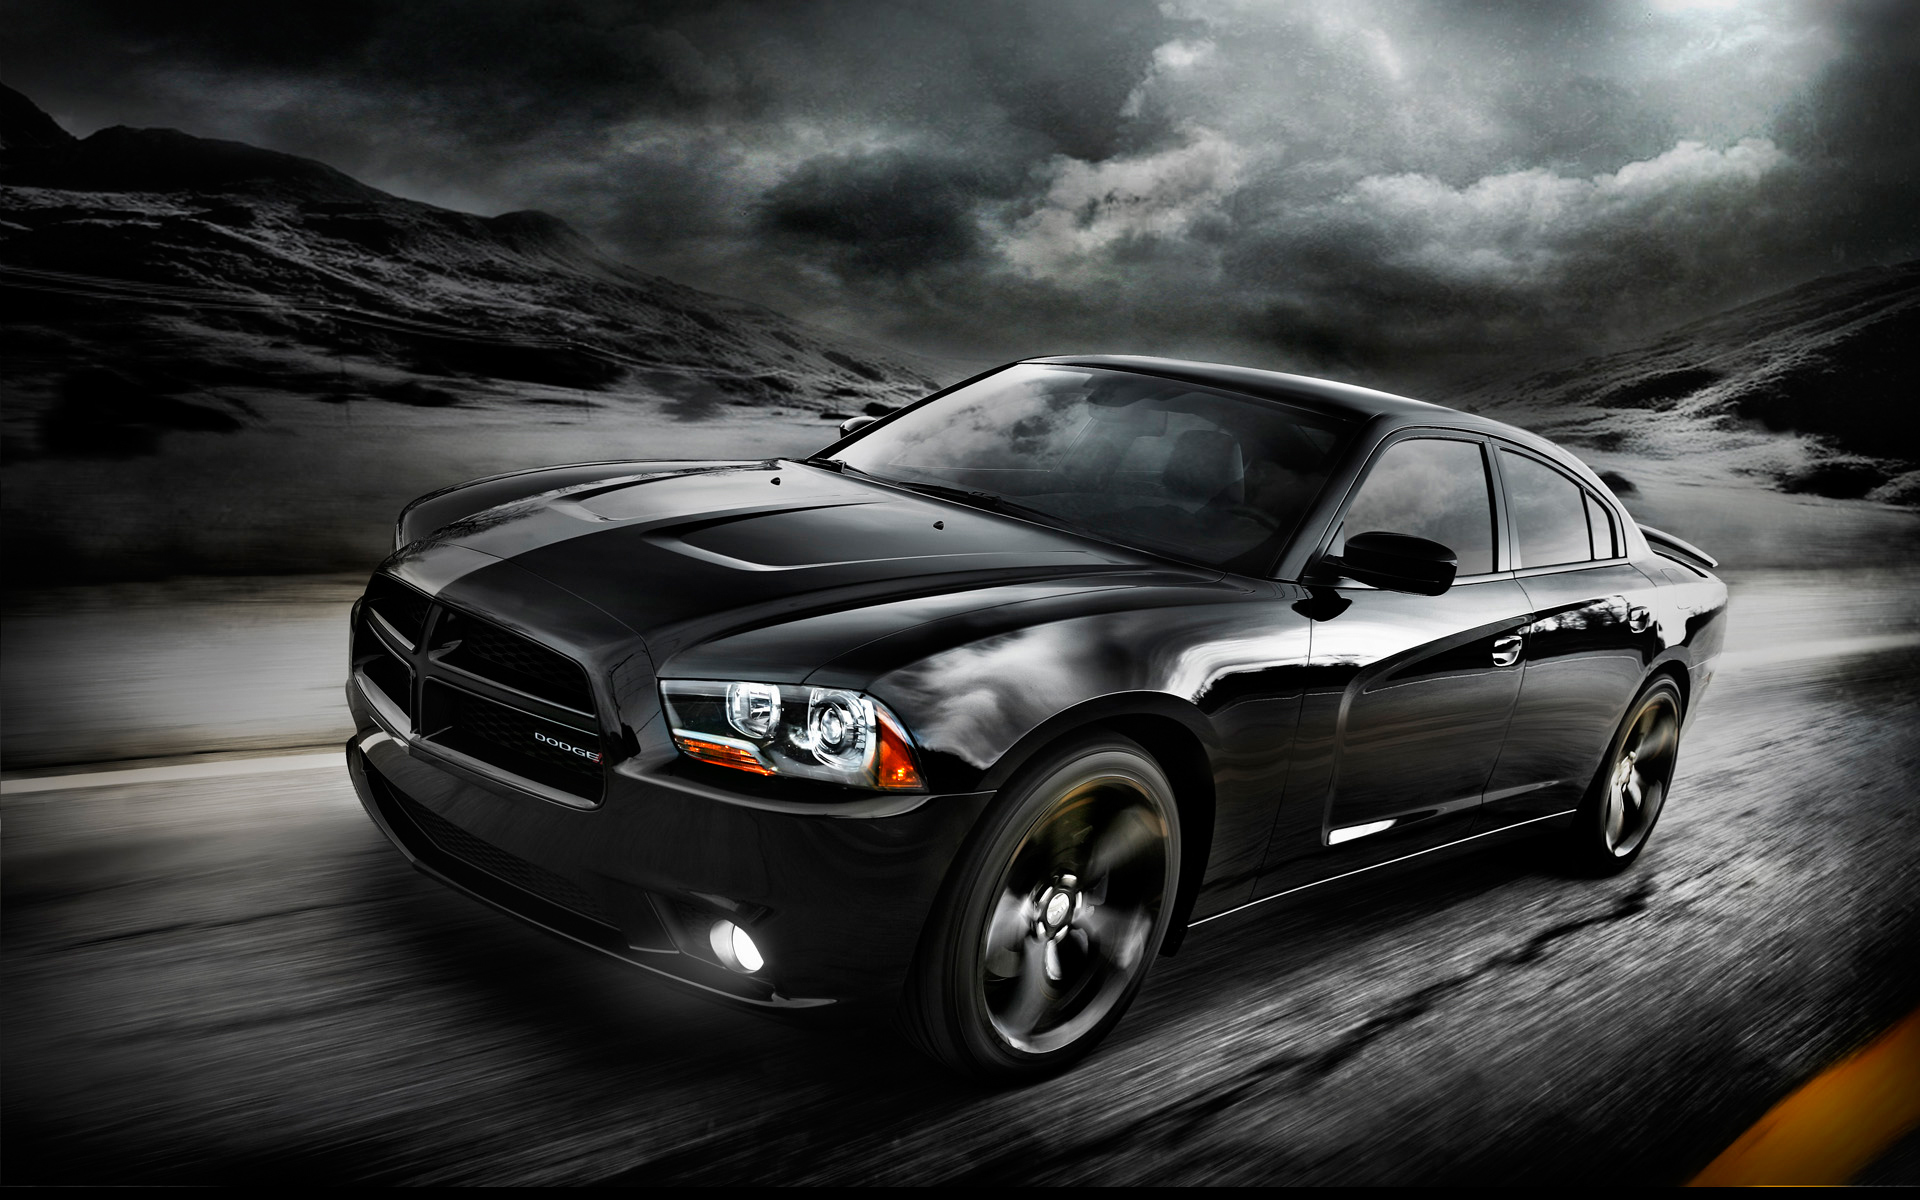 2012 Dodge Charger Wallpaper | HD Car Wallpapers | ID #2464